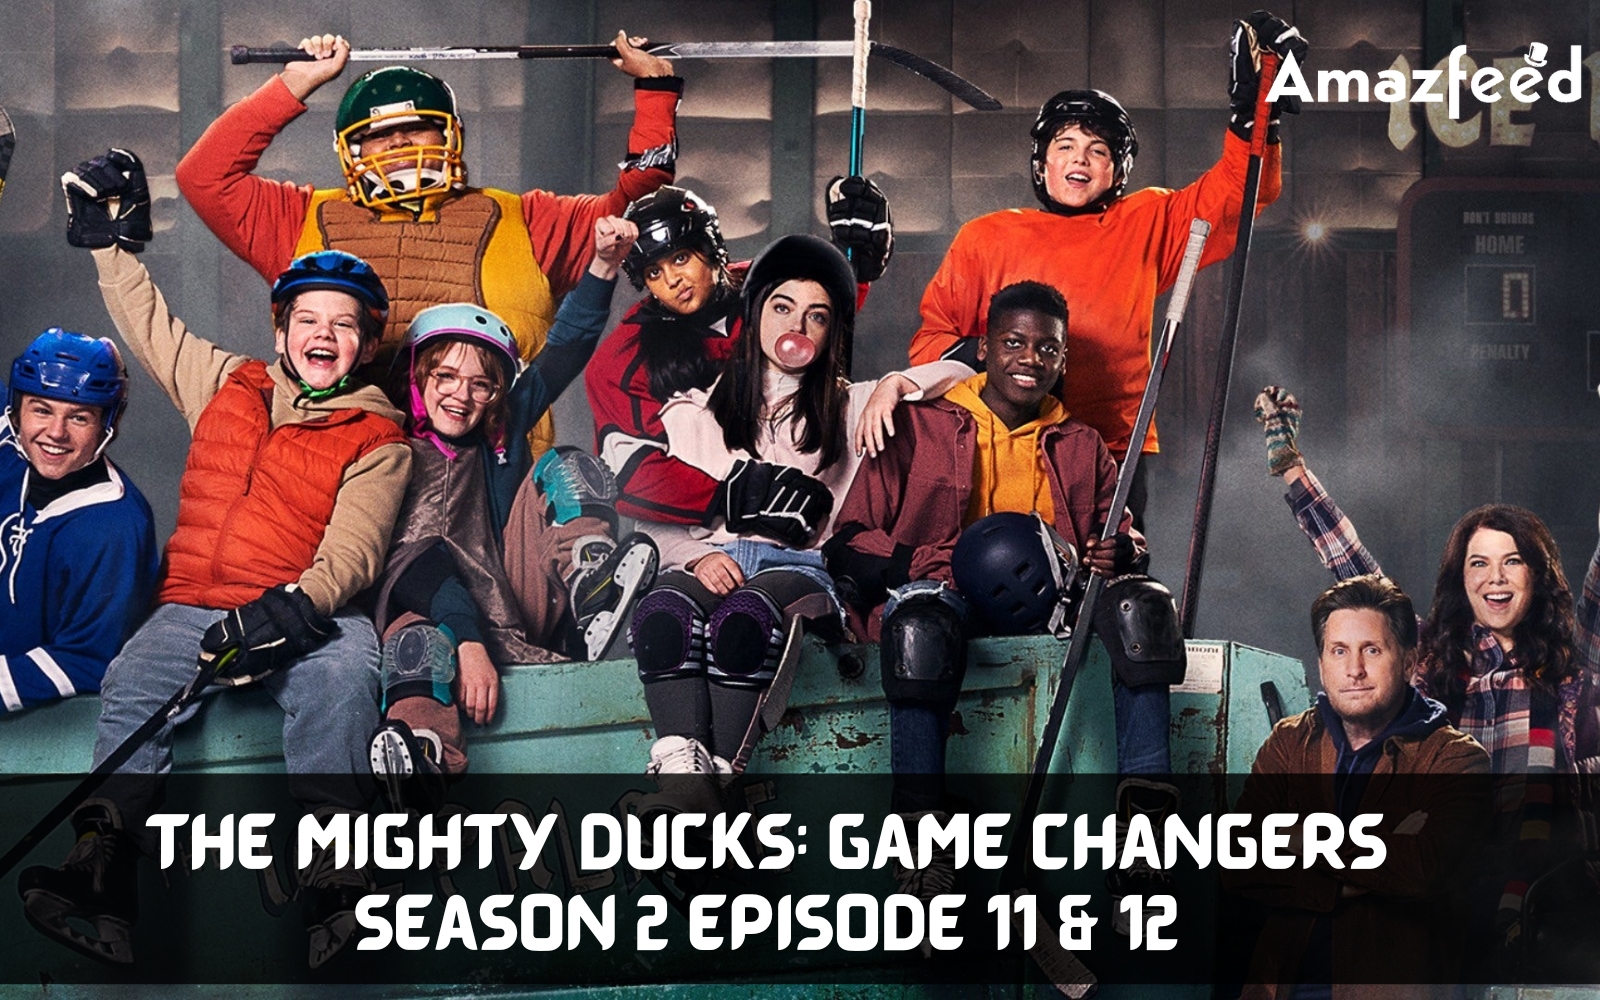 The Mighty Ducks: Game Changers season 2 Episode 11 & 12